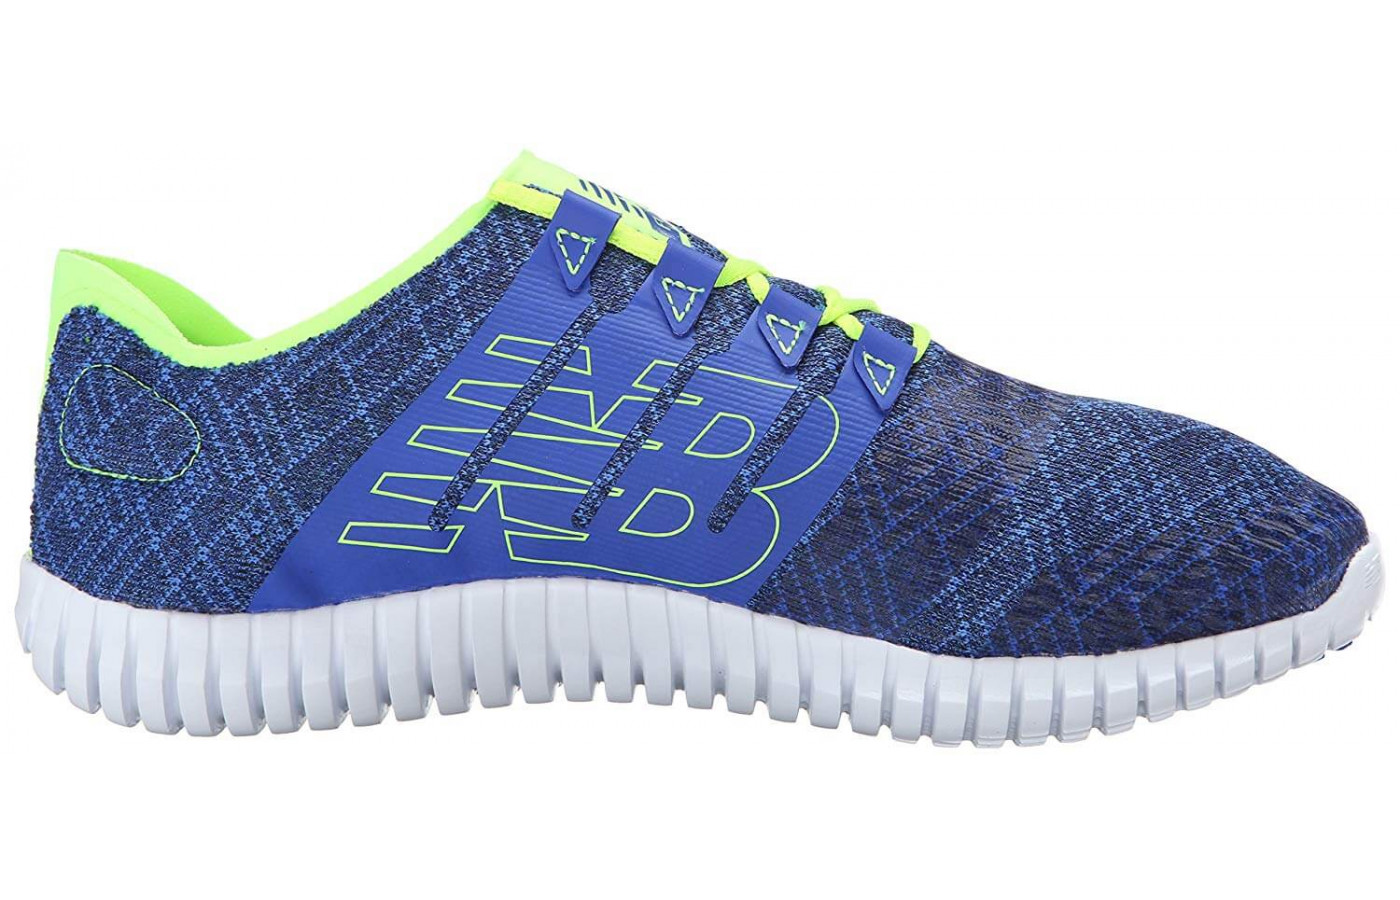 Runners love the thin, sleek look and feel of the shoe. 